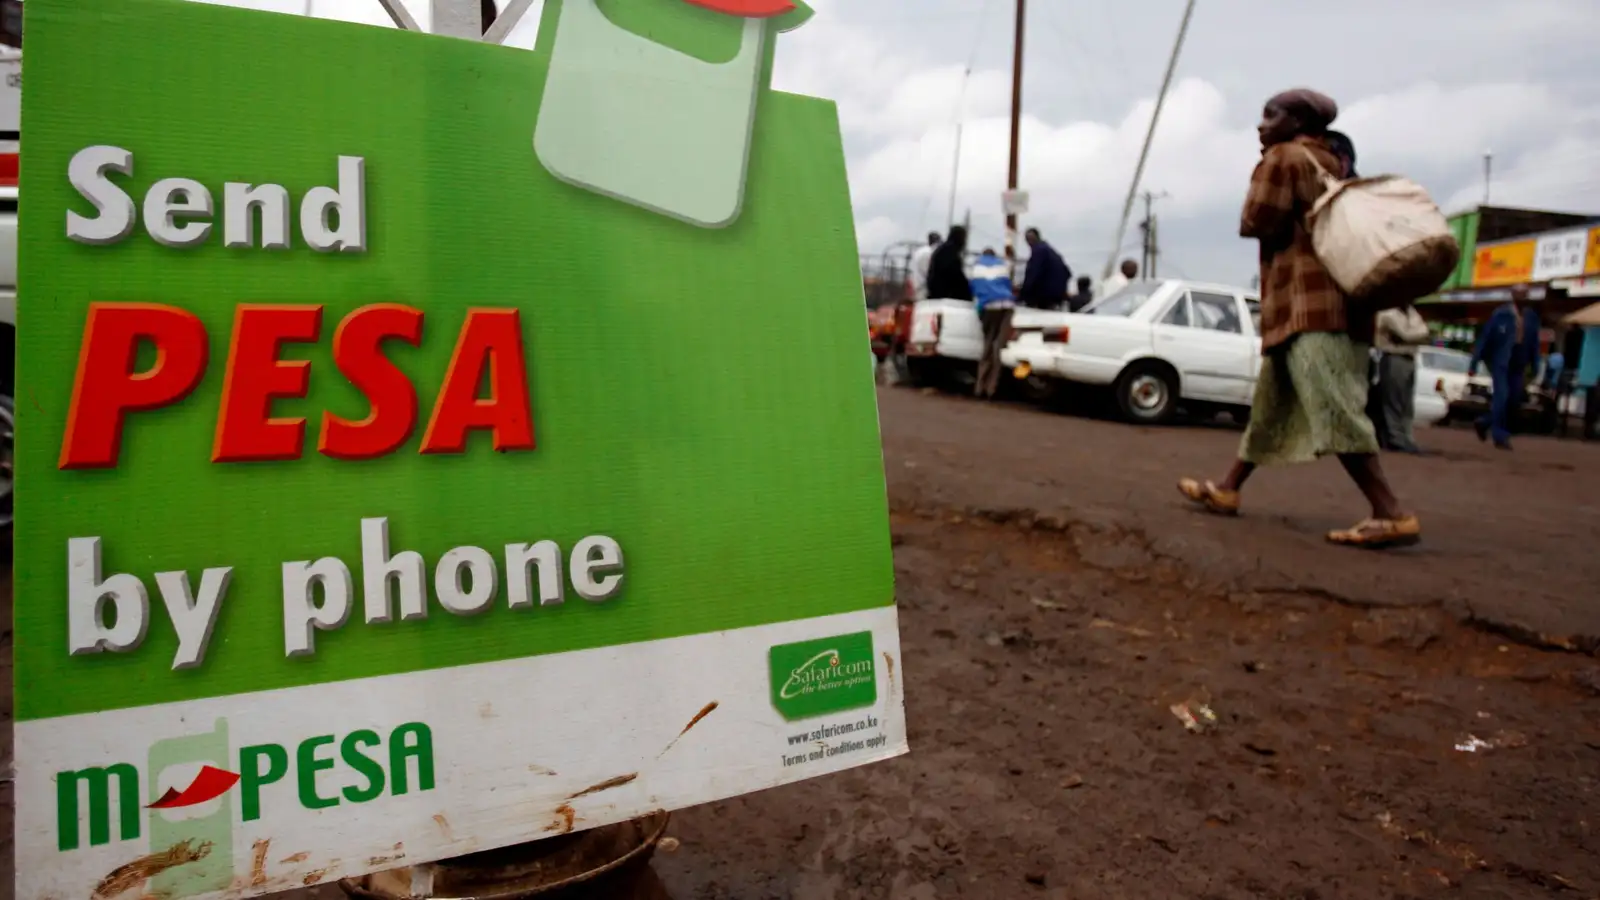 Safaricom has also not disclosed whether a dedicated M-PESA super app will complement the service